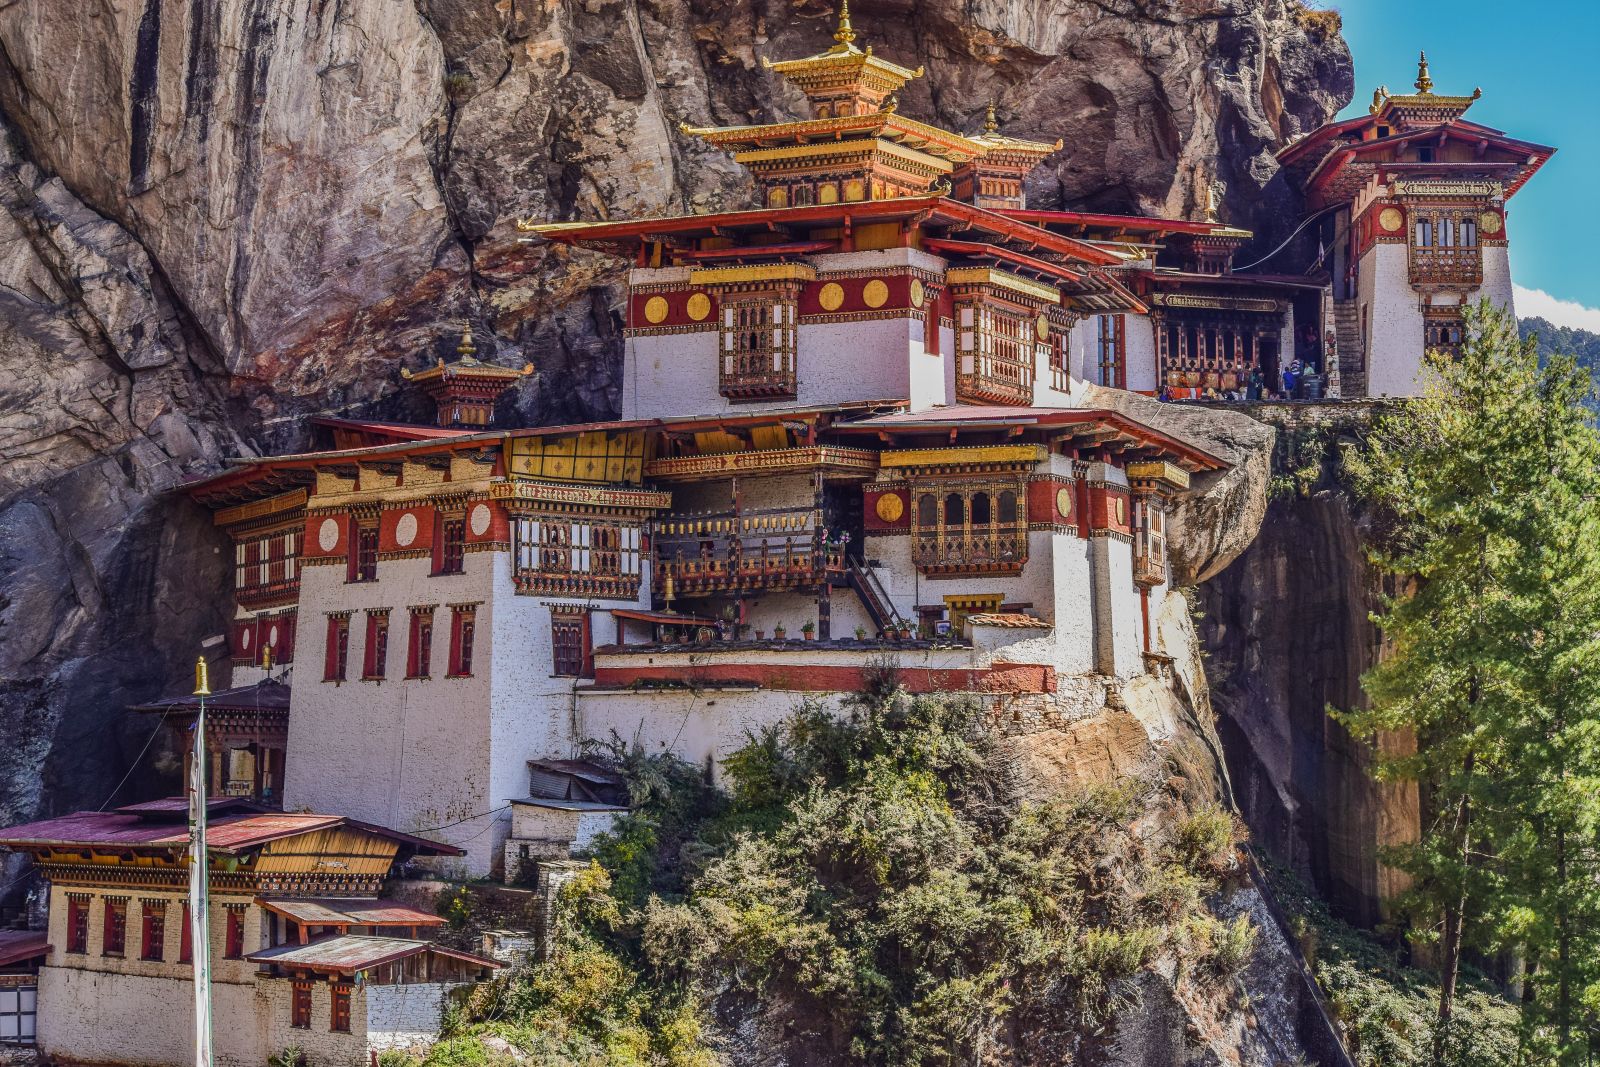 Detail of the exterior of the Tiger's Nest Temple in Bhutan